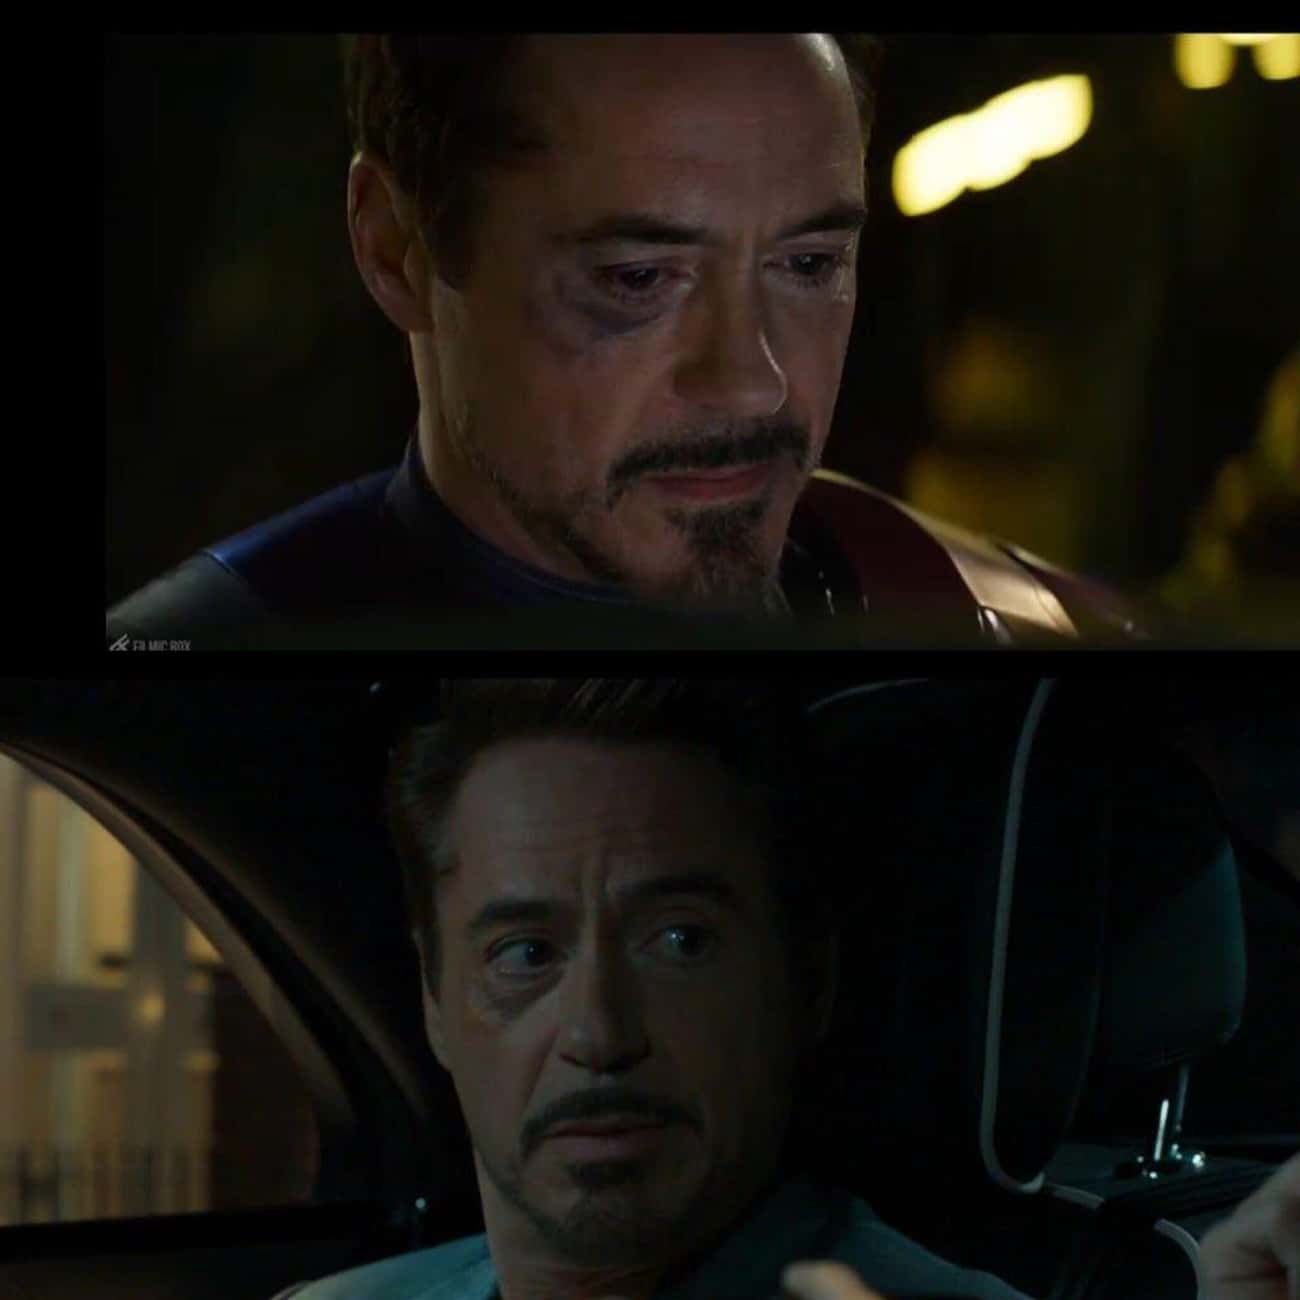 Tony's Bruises In 'Homecoming' Perfectly Match His Injuries In 'Civil War'